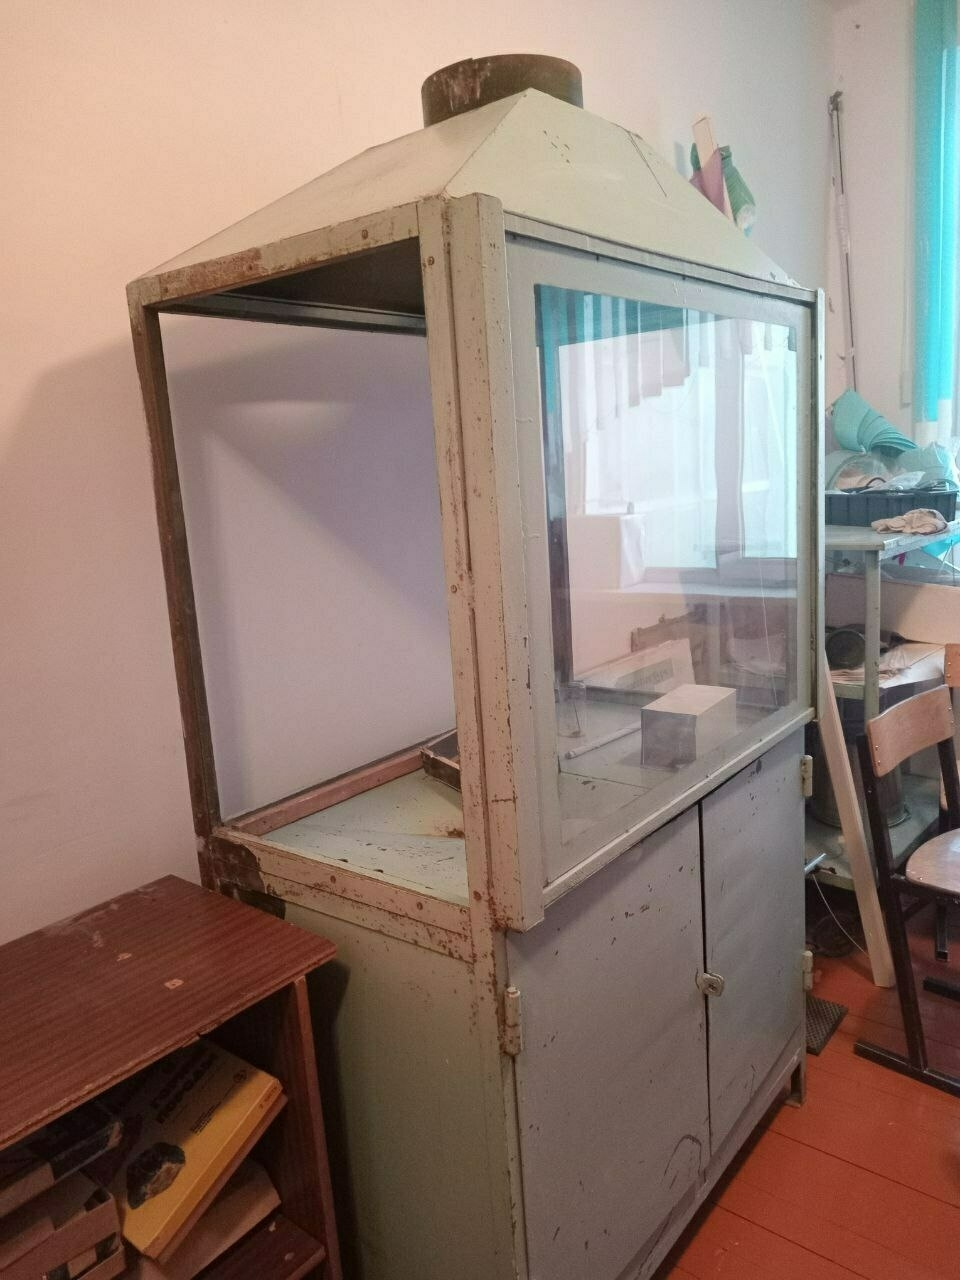 an old fume hood-looking piece of equipment amongst other things in a small storage room